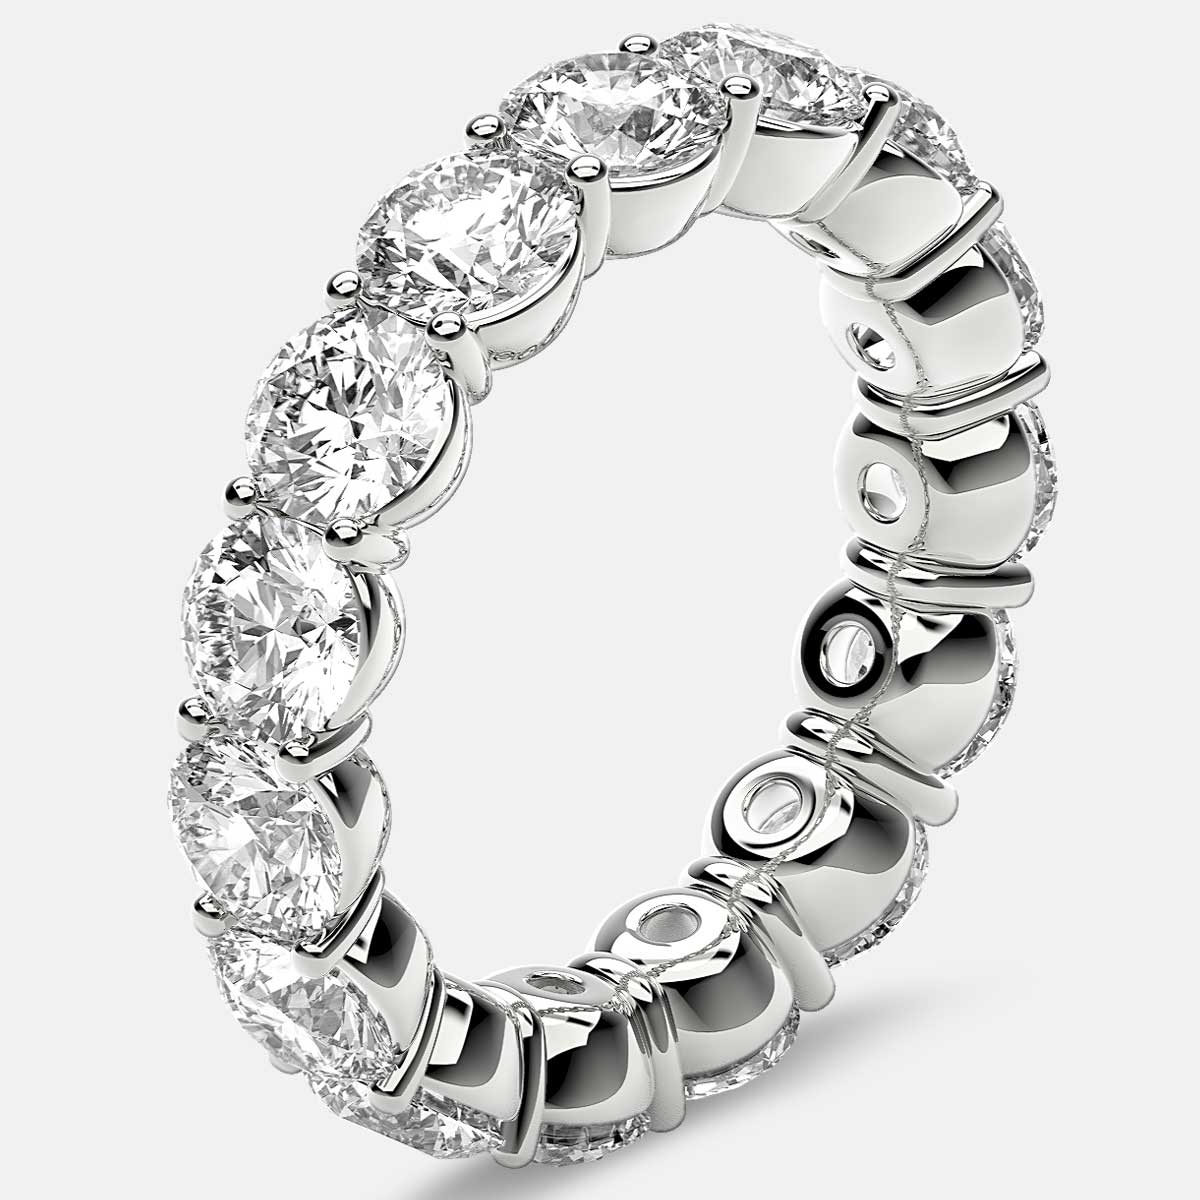 Classic Prong Set Eternity Ring with Round Diamonds in Platinum